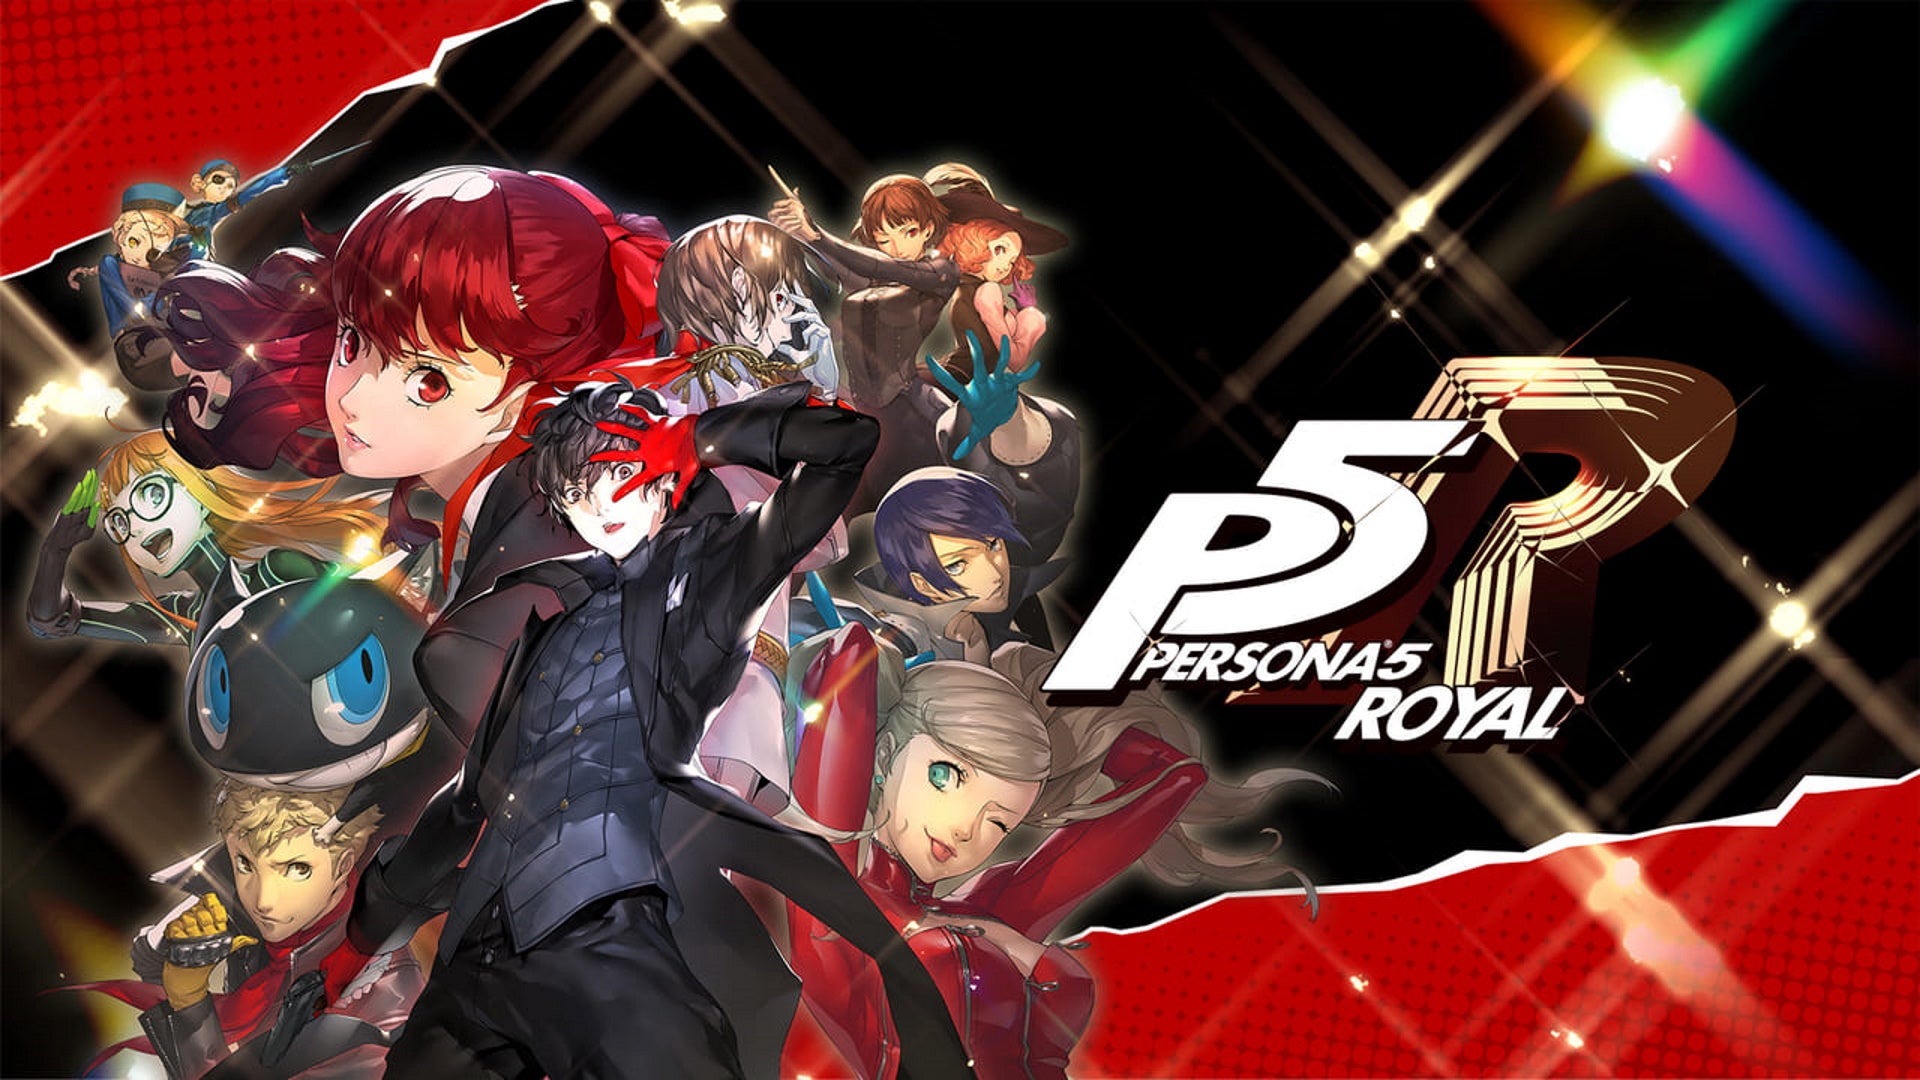 Persona 5 Royal true ending requirements: A group of anime teenagers stands against a red and black background with white and gold letters and numbers spelling out P5R